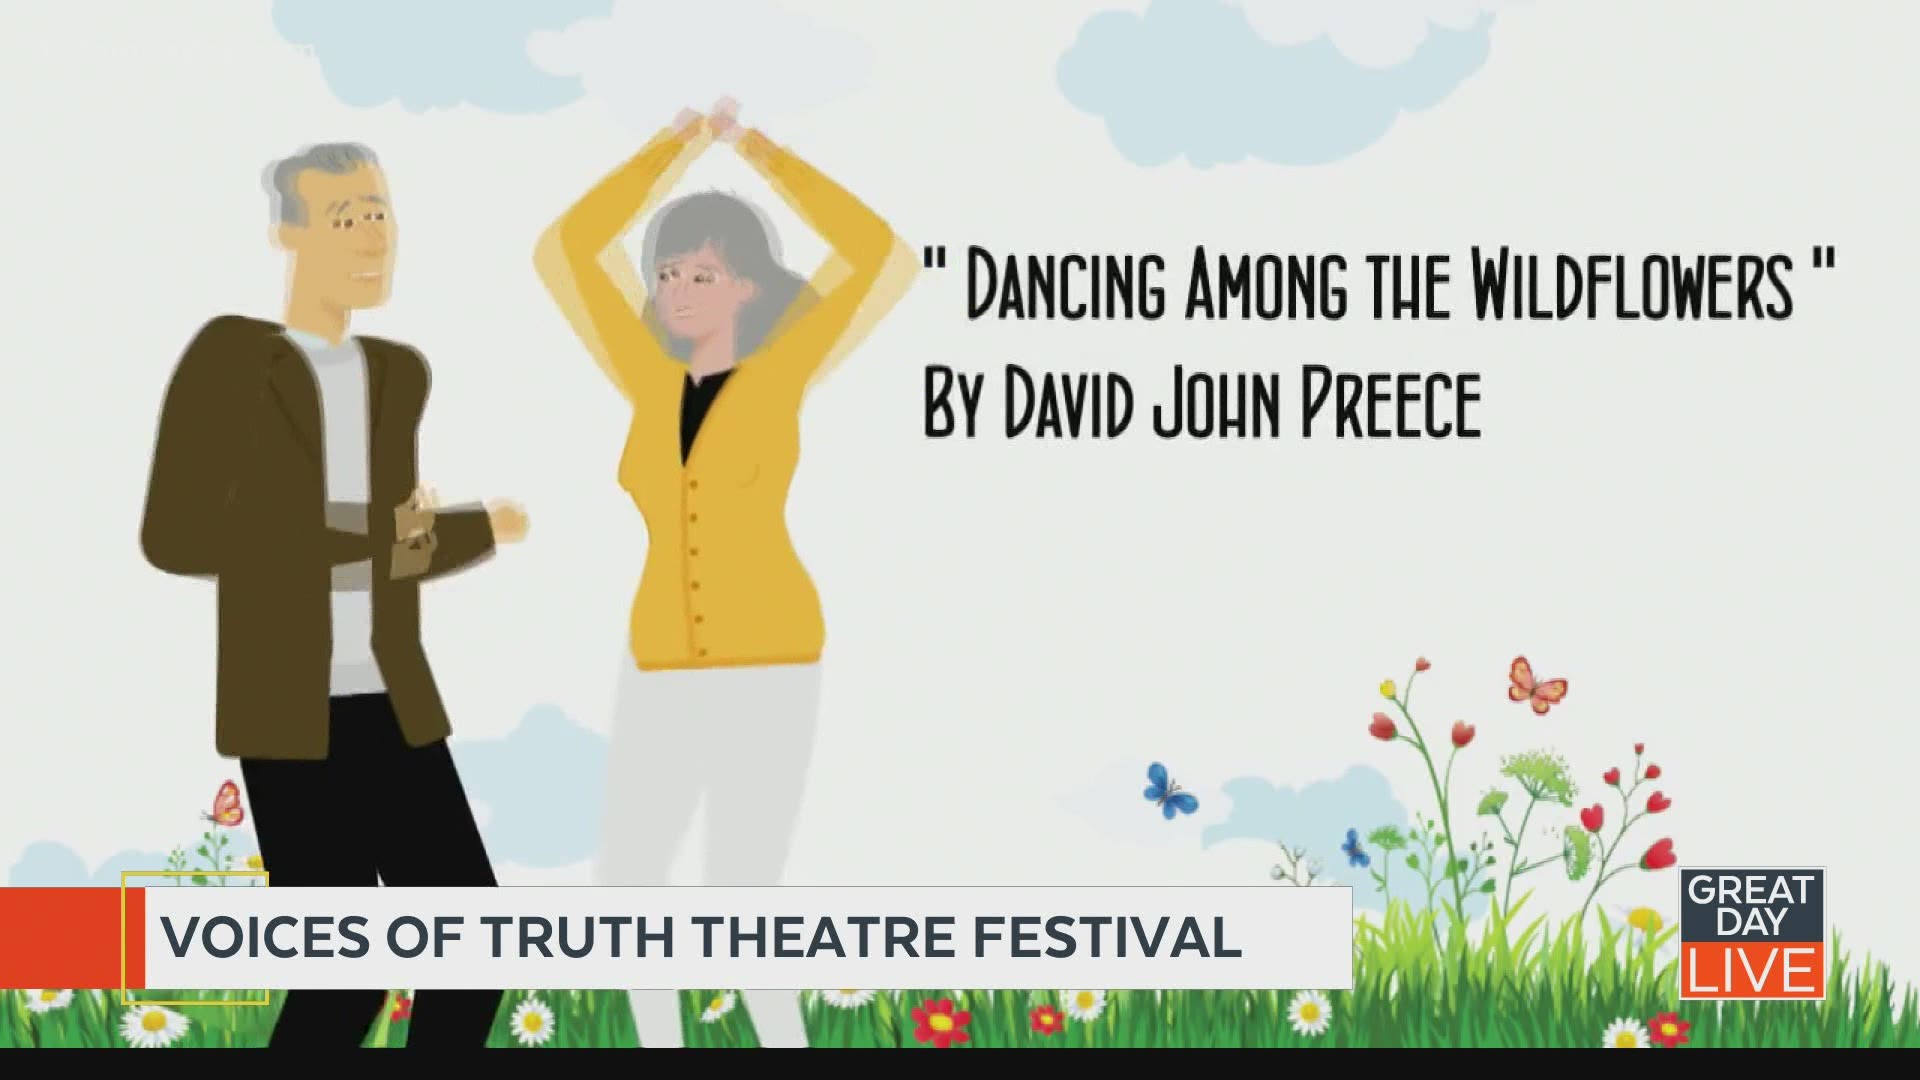 Virtual theatre festival to highlight ‘voices of truth’